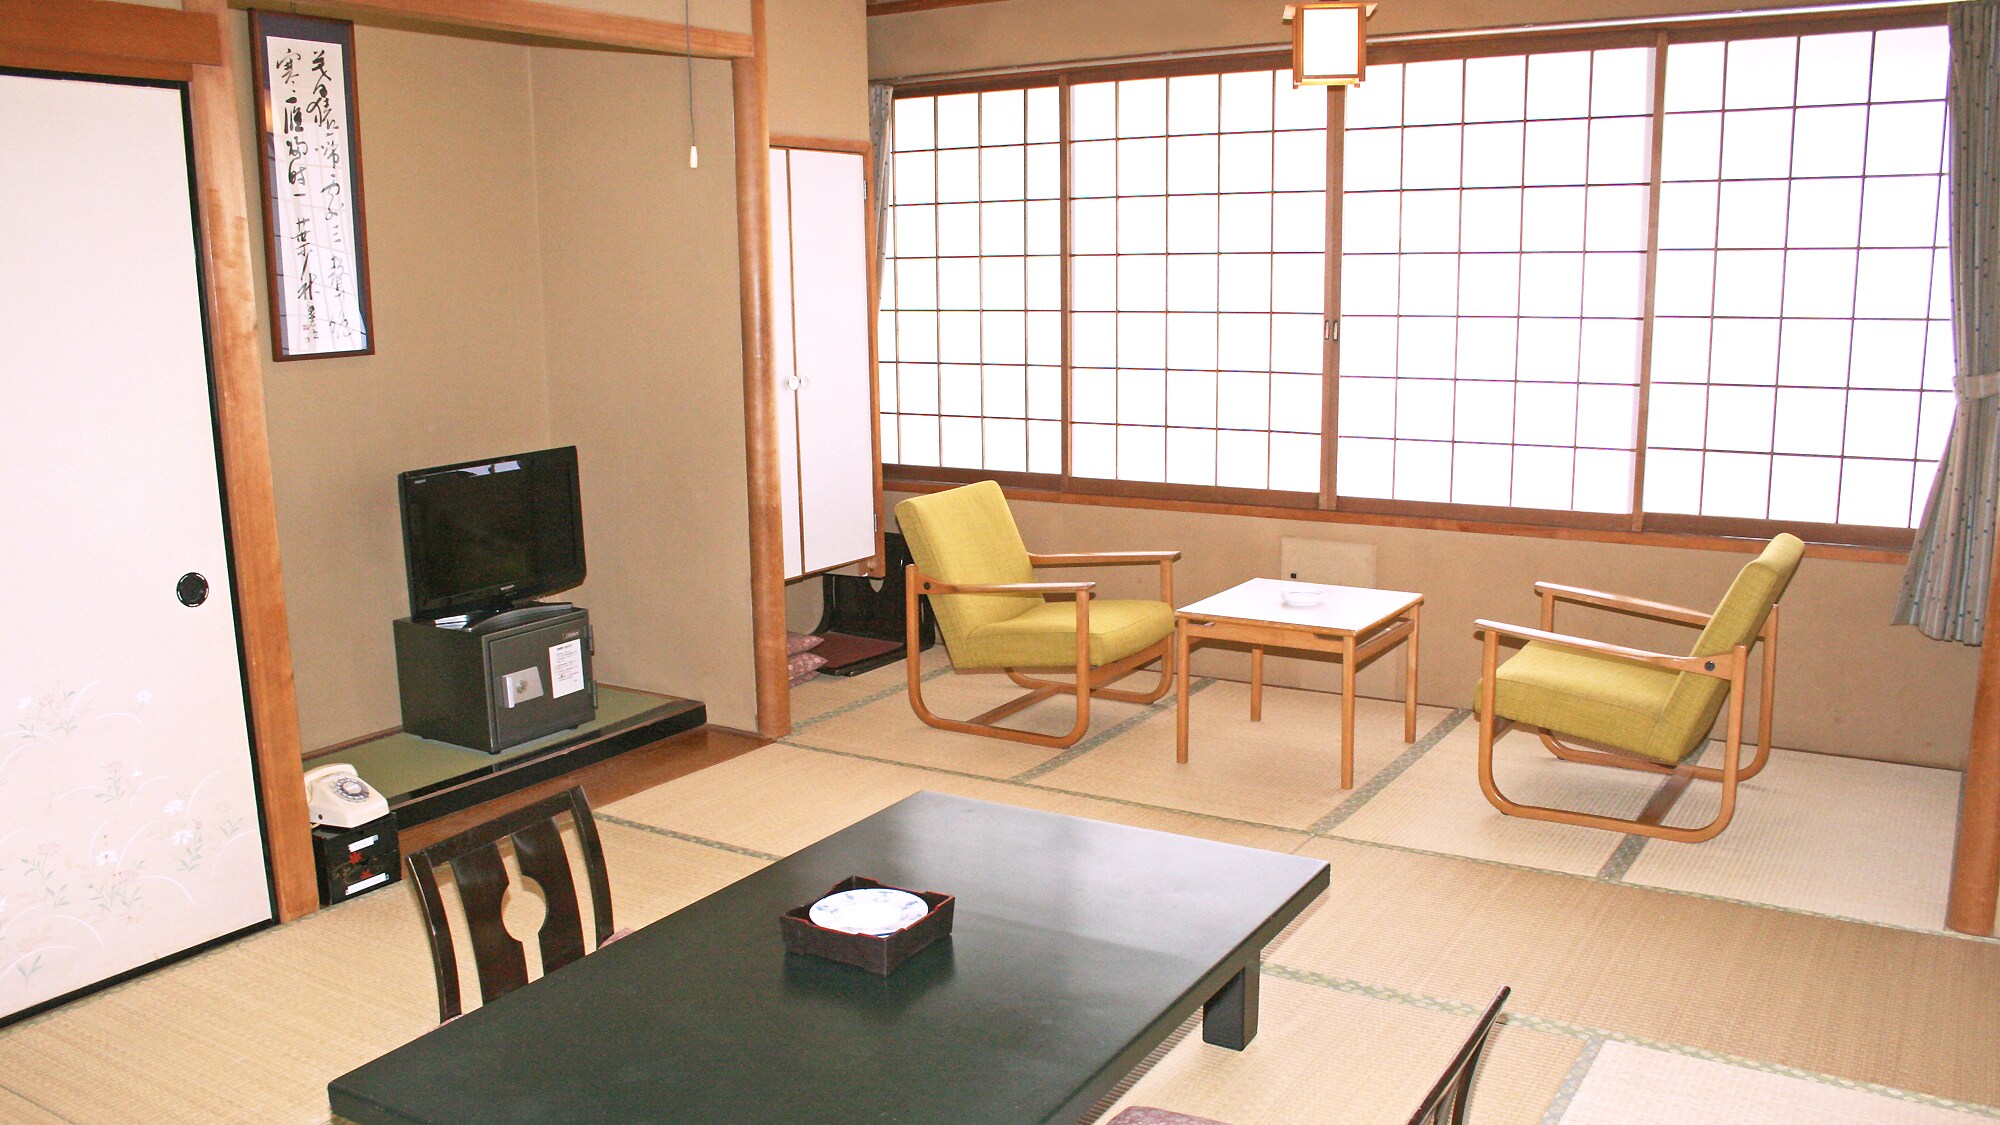 West Building Japanese-style room 10 tatami mats